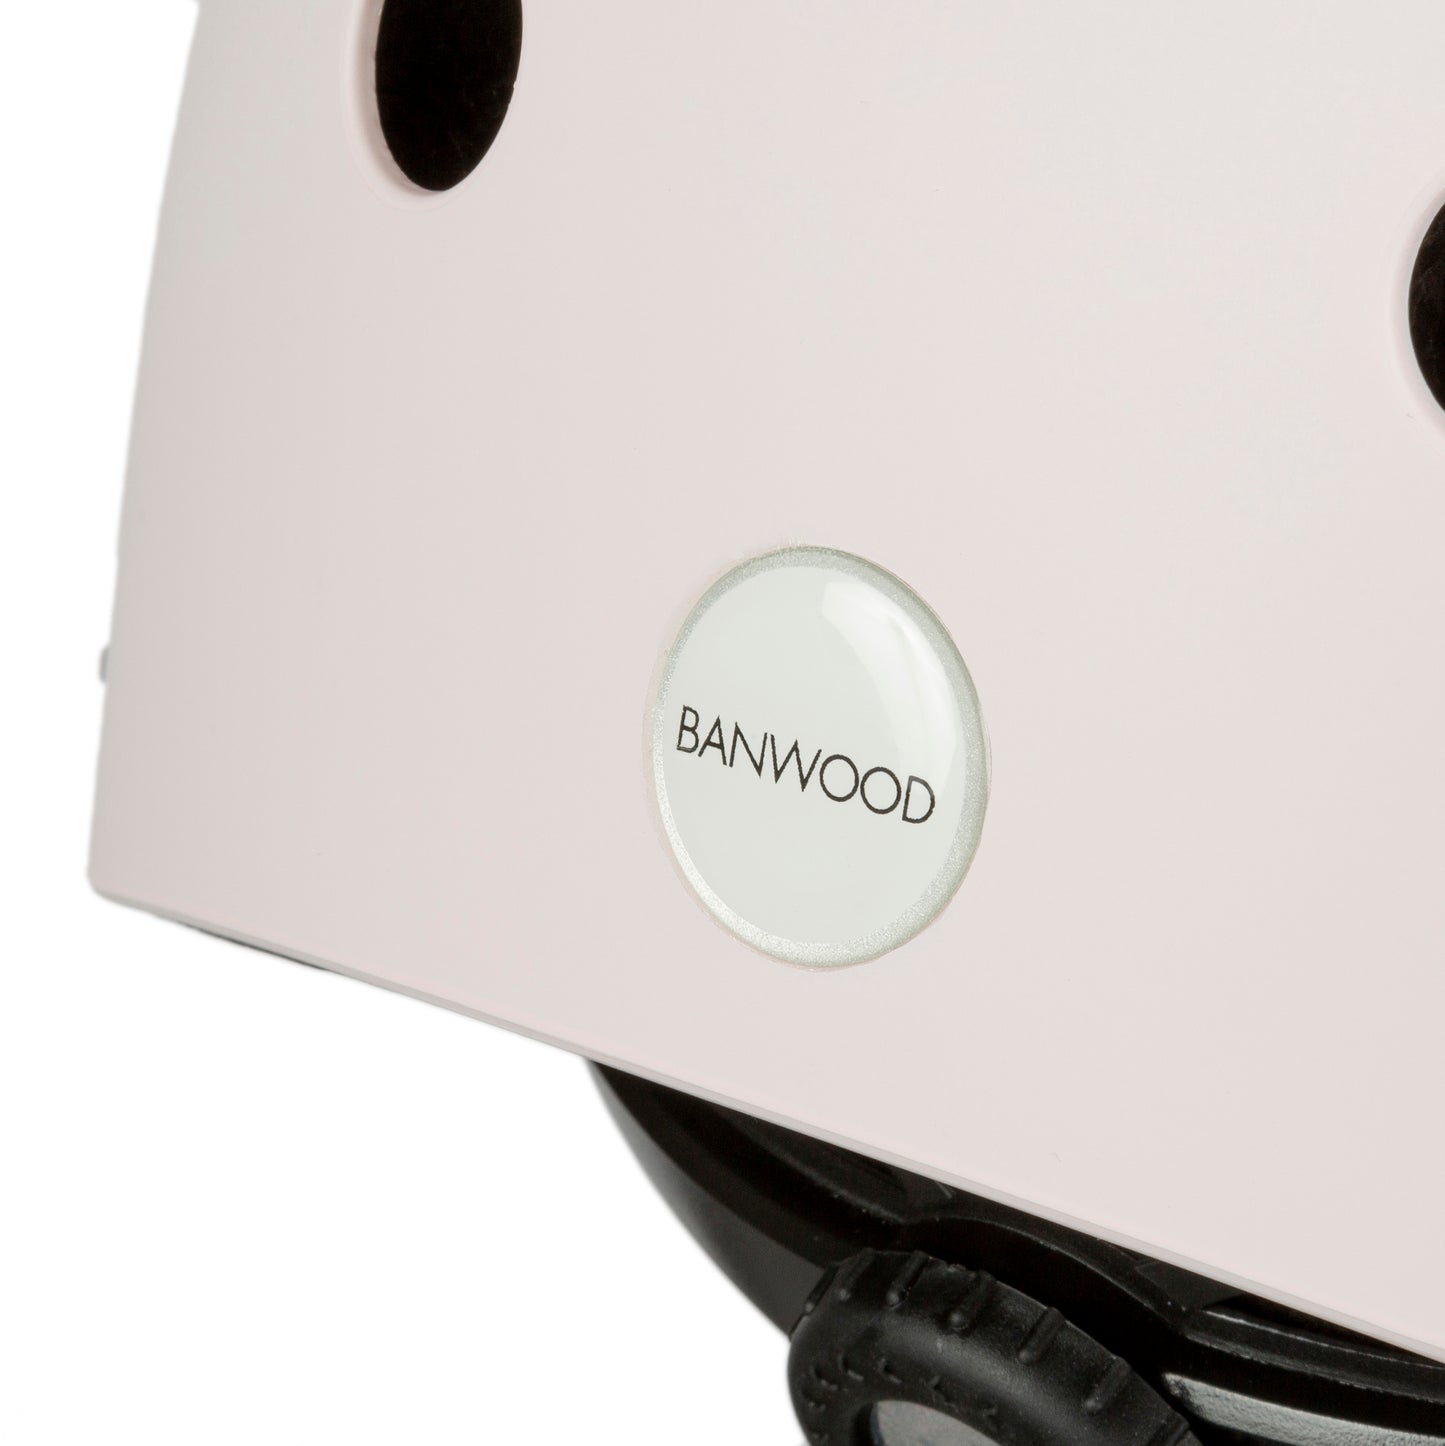 Classic Helmet - Matte Pale Pink - pre-order now / back in stock End of February